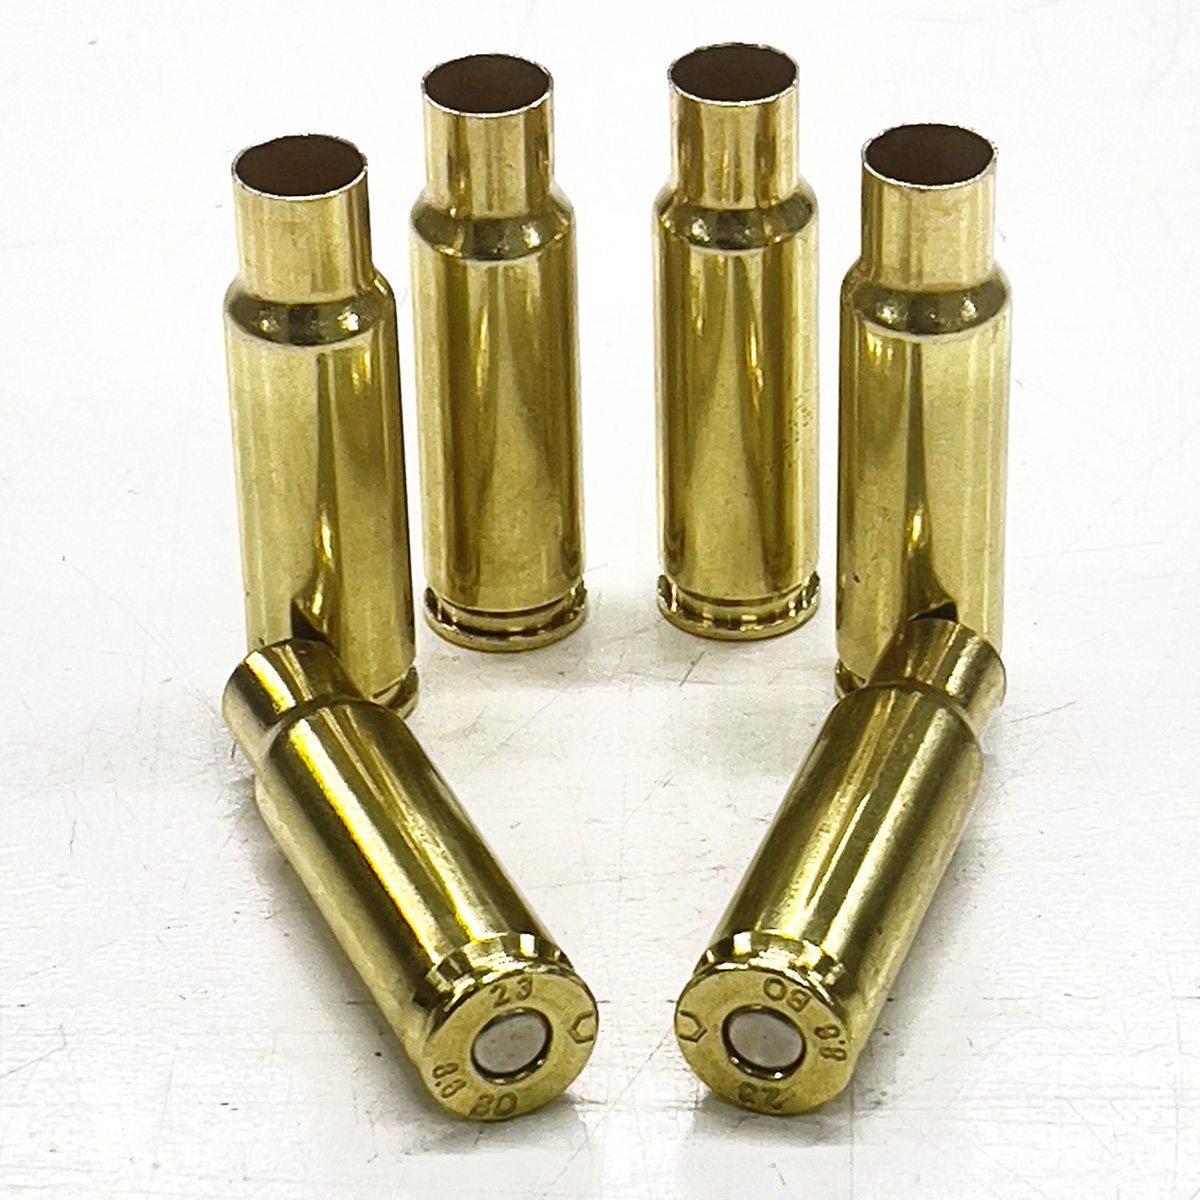 8.6 Blackout Subsonic Premium Primed Brass Cases 50ct bag